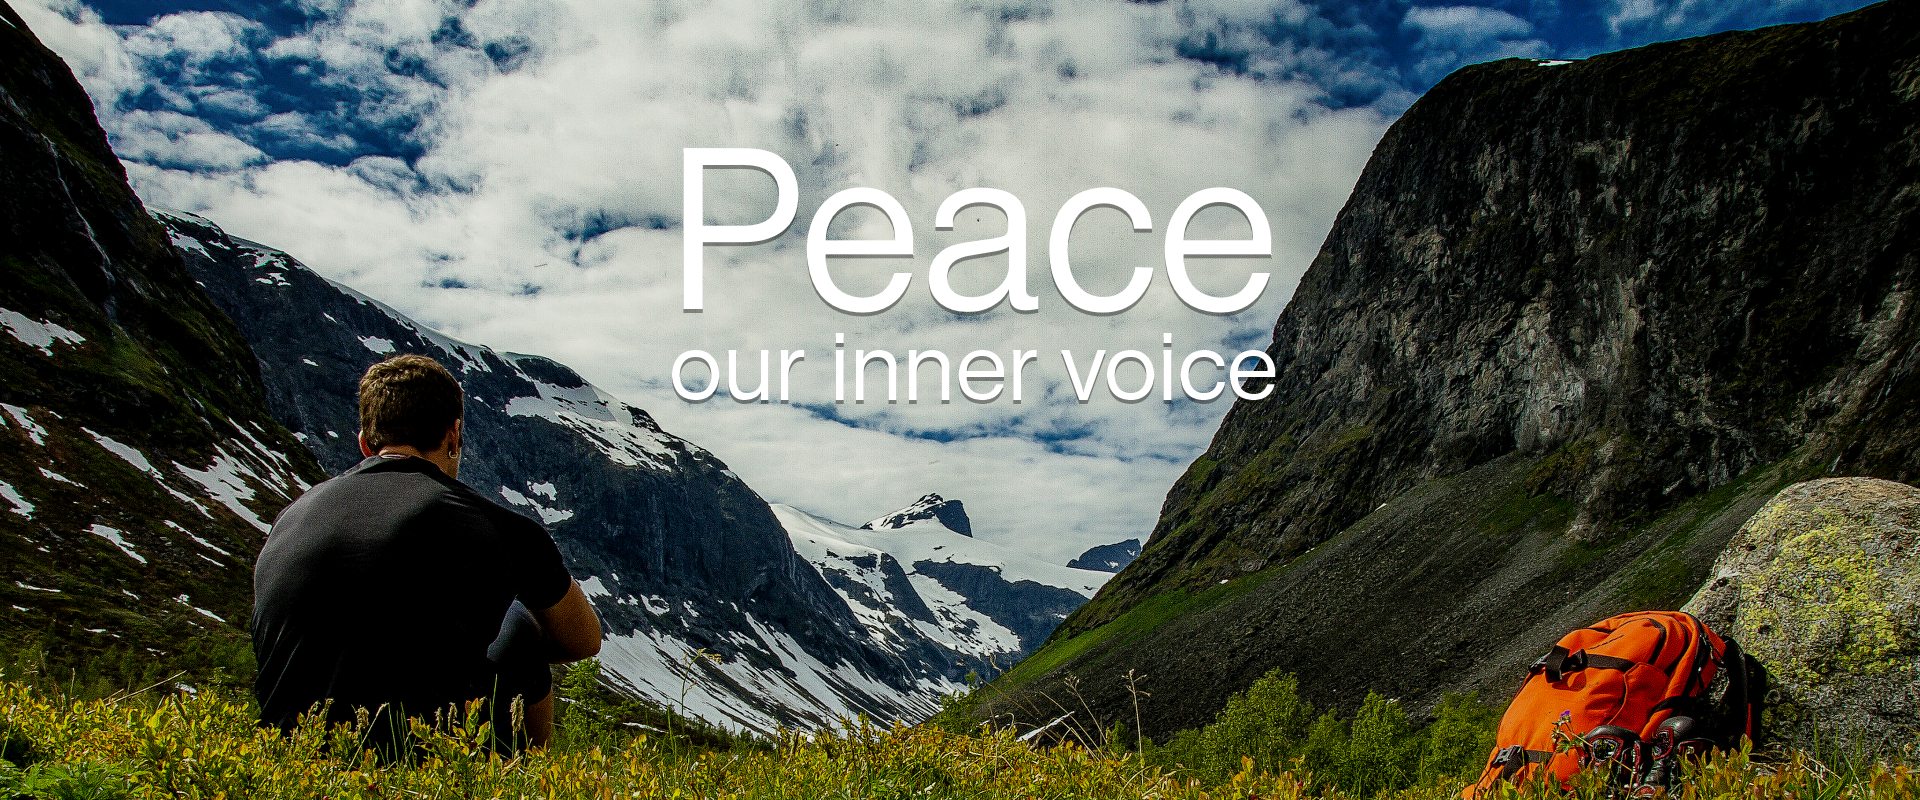 Inner voice of Peace